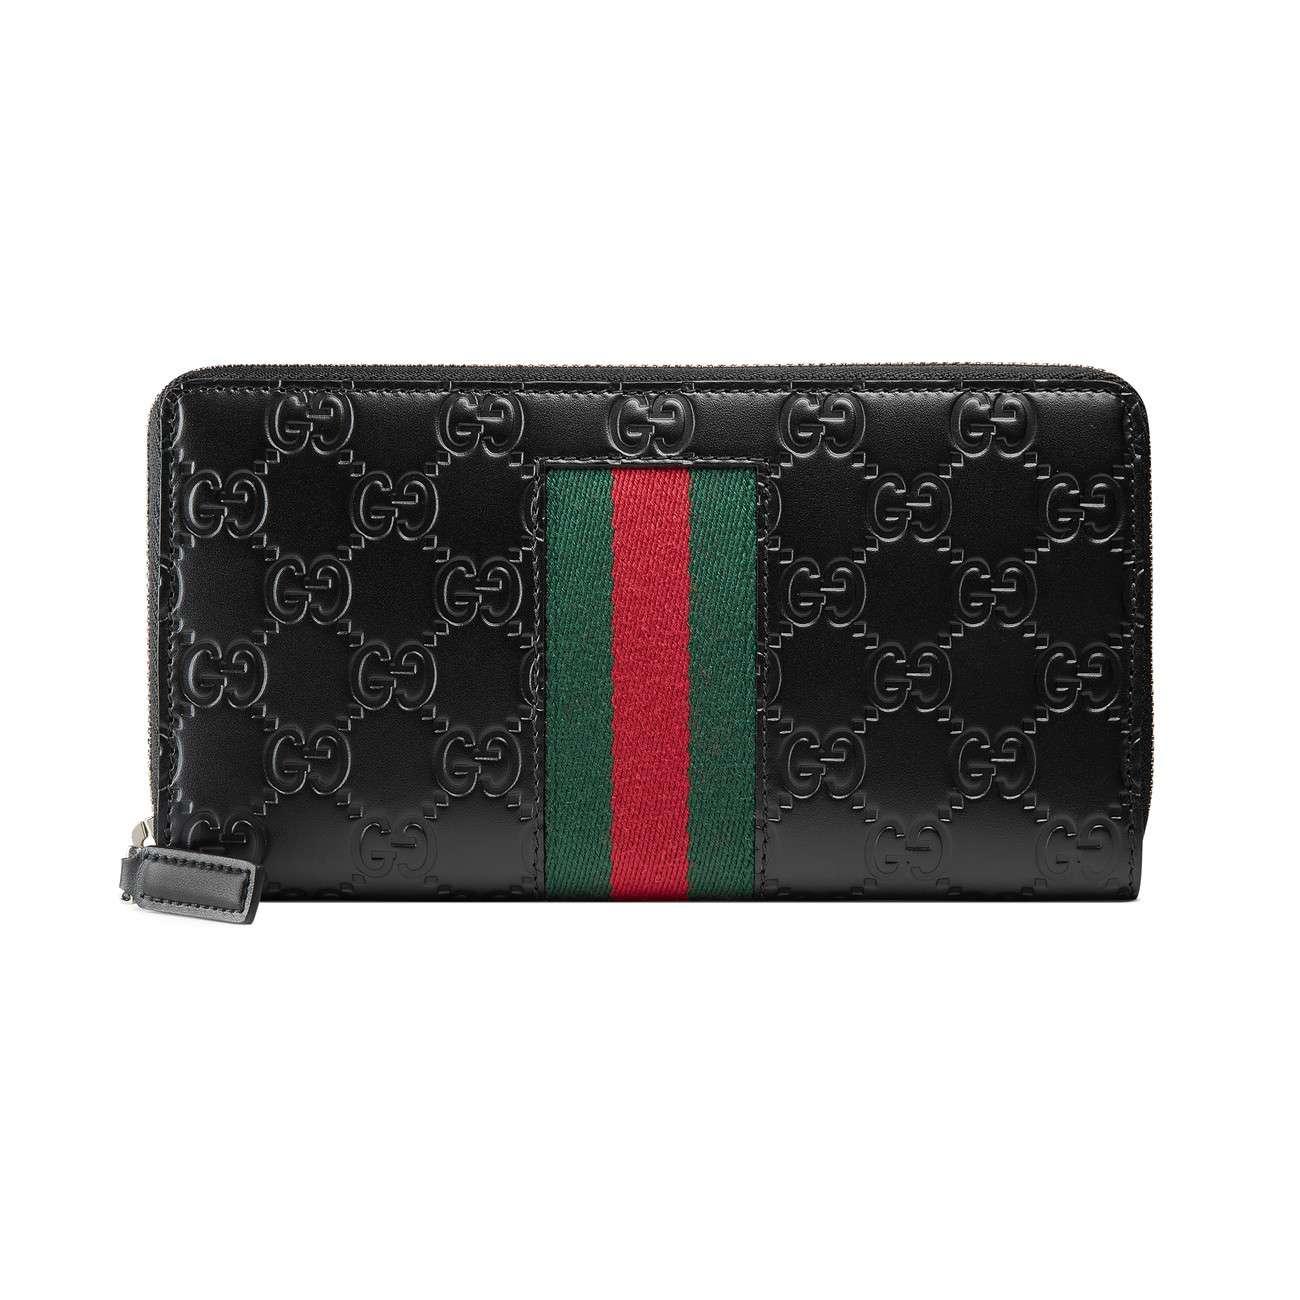 Gucci Leather Signature Web Zip Around Wallet in Black for Men - Lyst